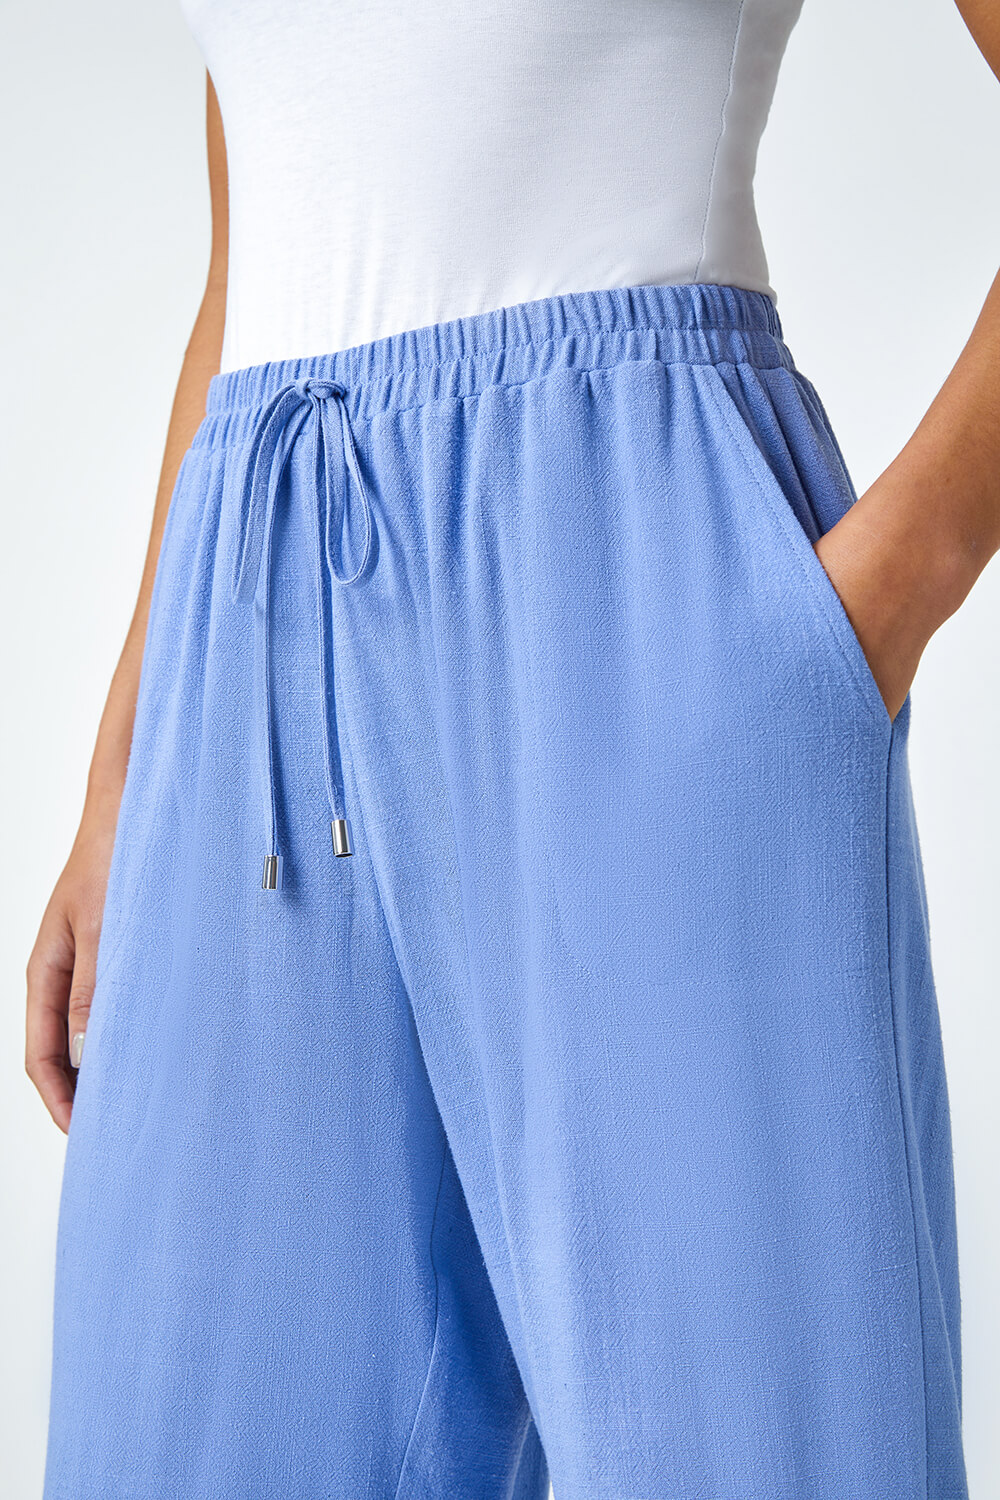 Blue Petite Linen Mix Wide Cropped Trousers, Image 5 of 5